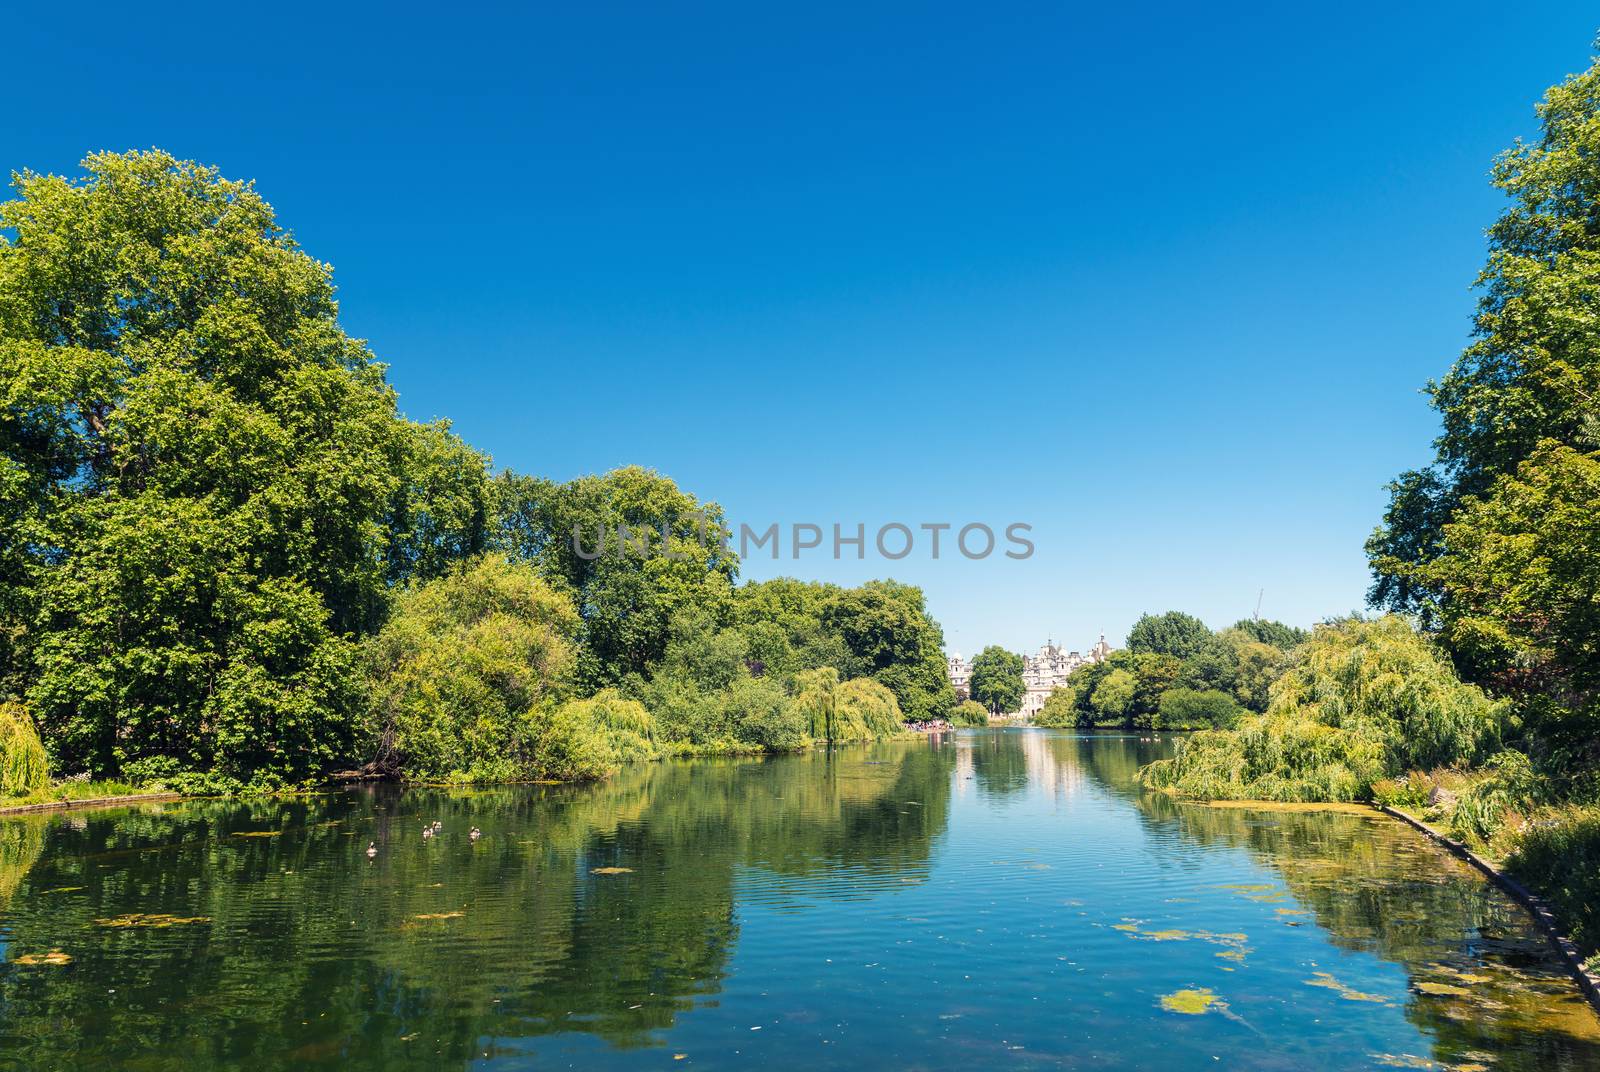 Saint James Park in London on a beautiful summer day by jovannig